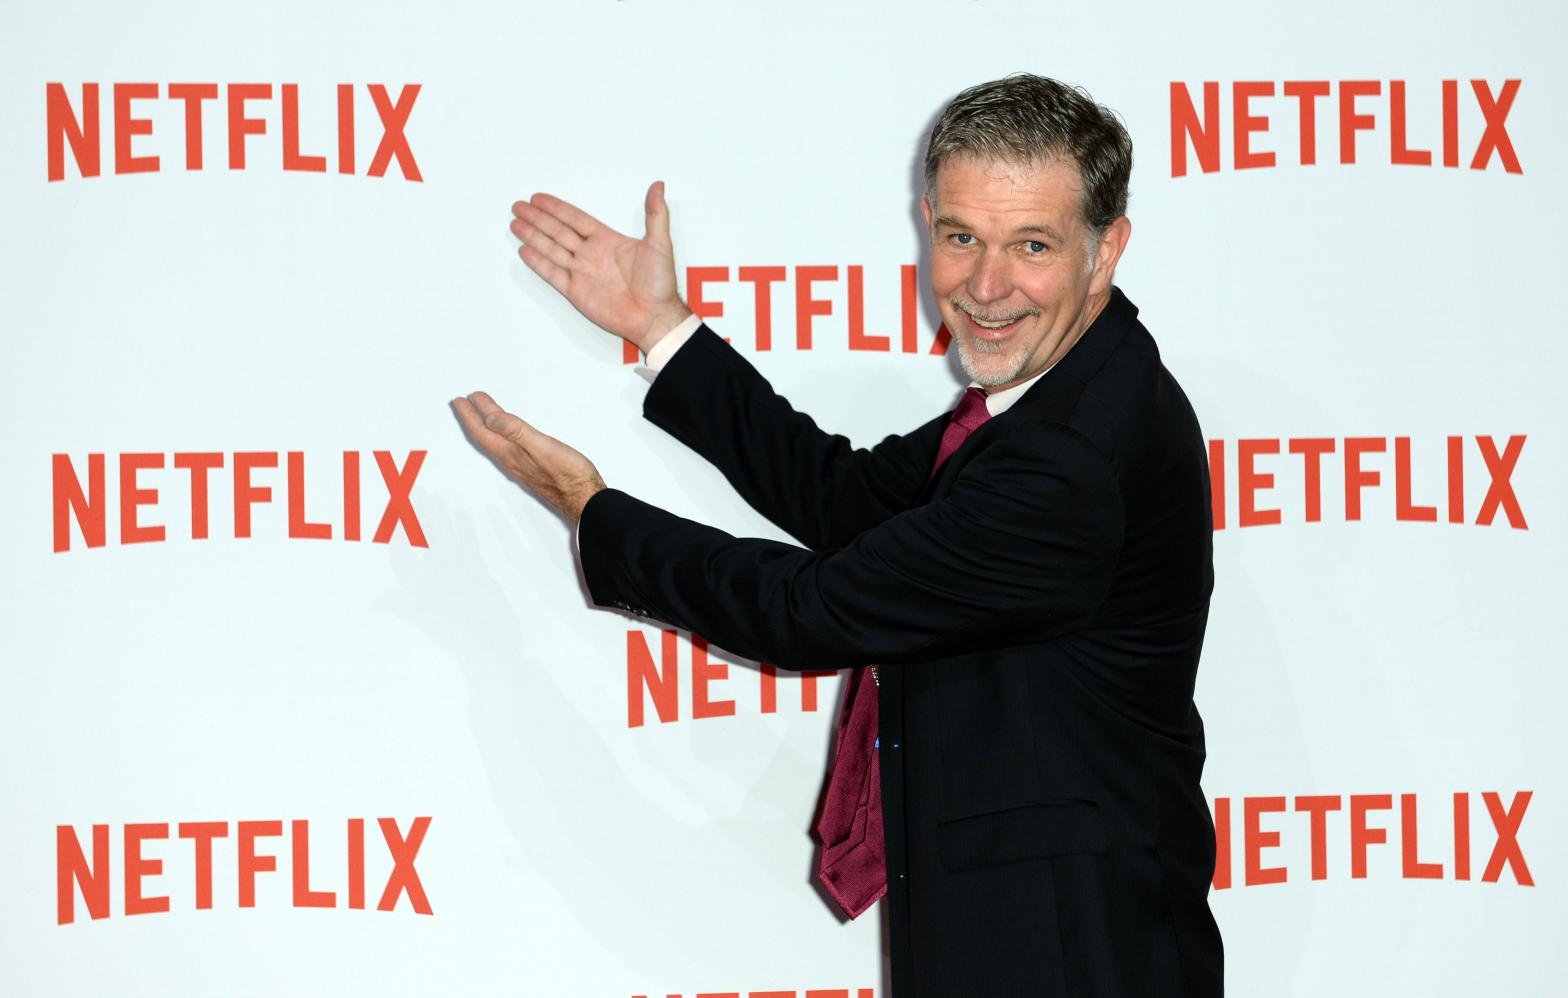 Netflix co-CEO Reed Hastings has long been the biggest evangelist for the platform, though now he's effectively blamed user password sharing and competition for the company's declining fortunes. (Photo: Britta Pedersen/picture-alliance/dpa, AP)